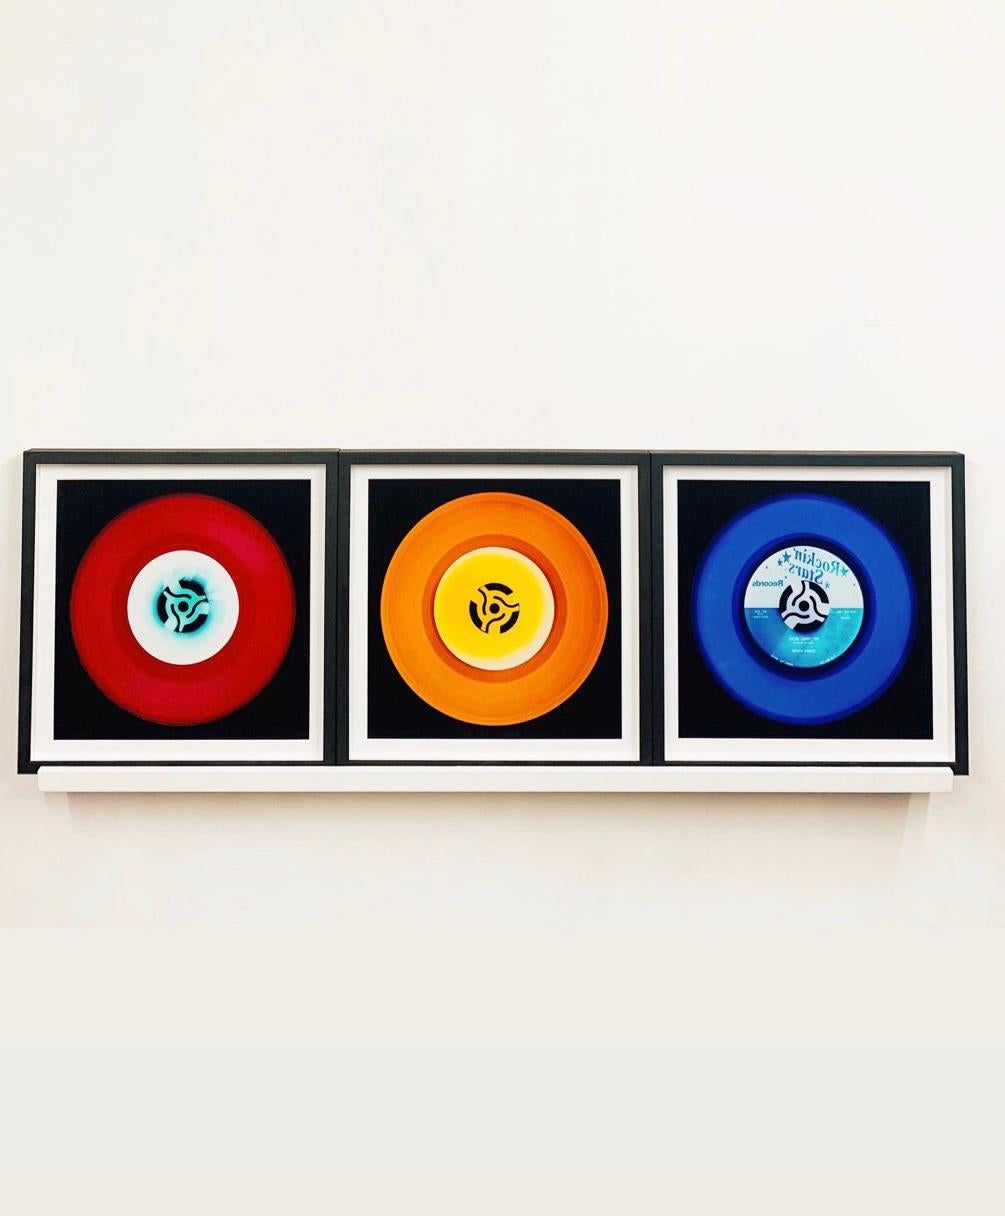 This listing is for three artworks from the Heidler & Heeps Vinyl Collection. Each artwork measures 16